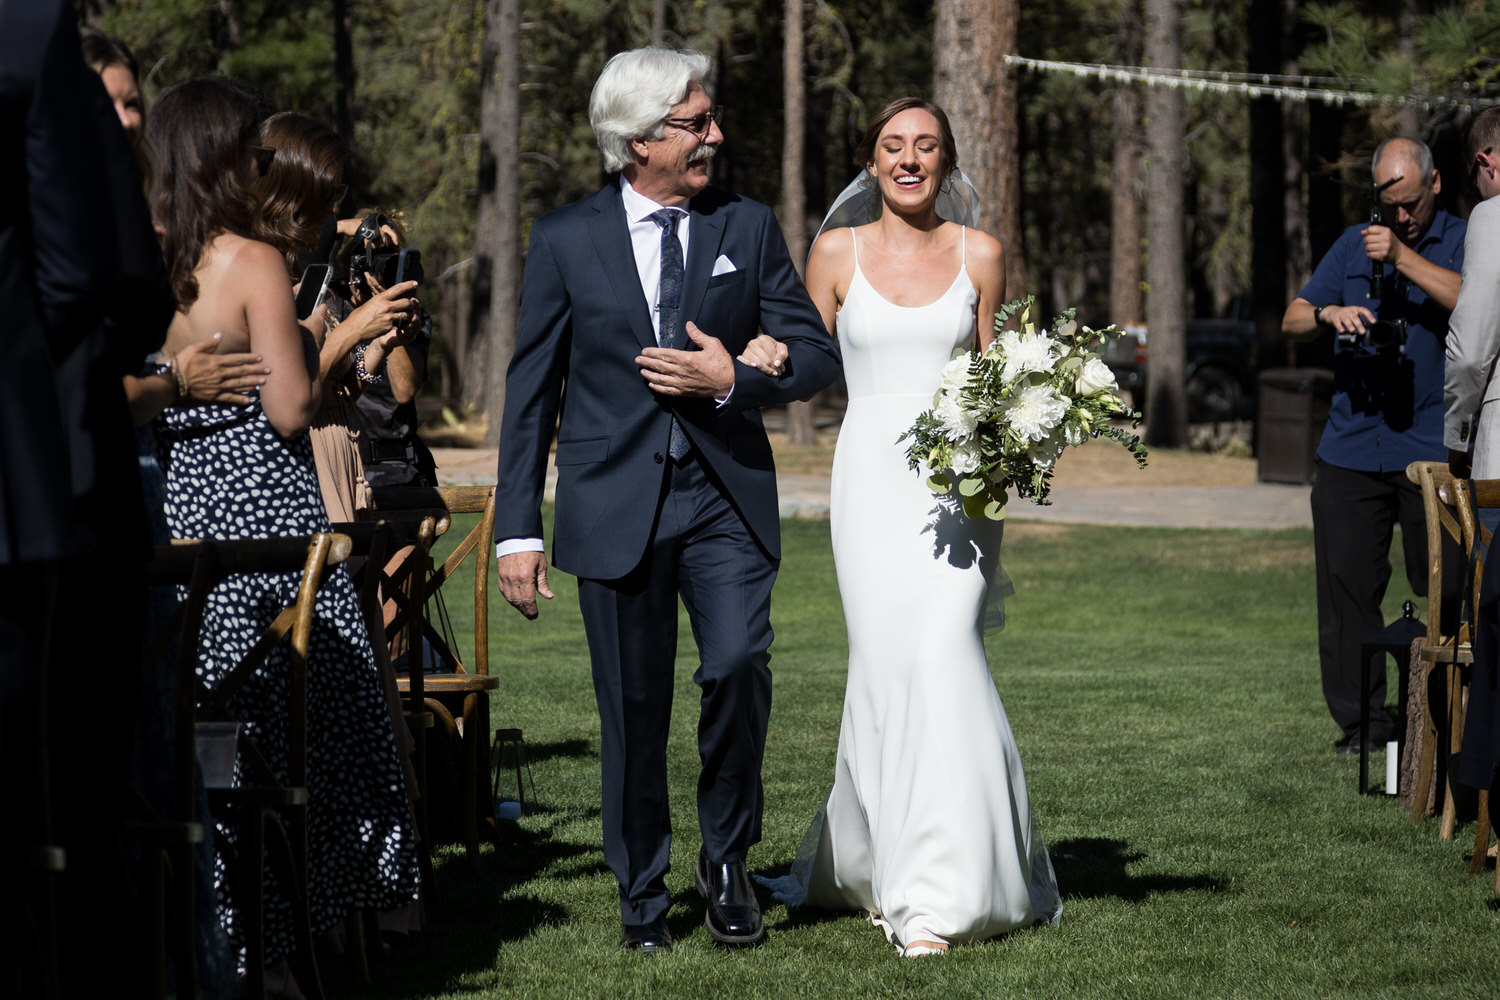 Arm-in-arm with her dad, an elated bride walks down the grassy aisle at Chalet View Lodge.